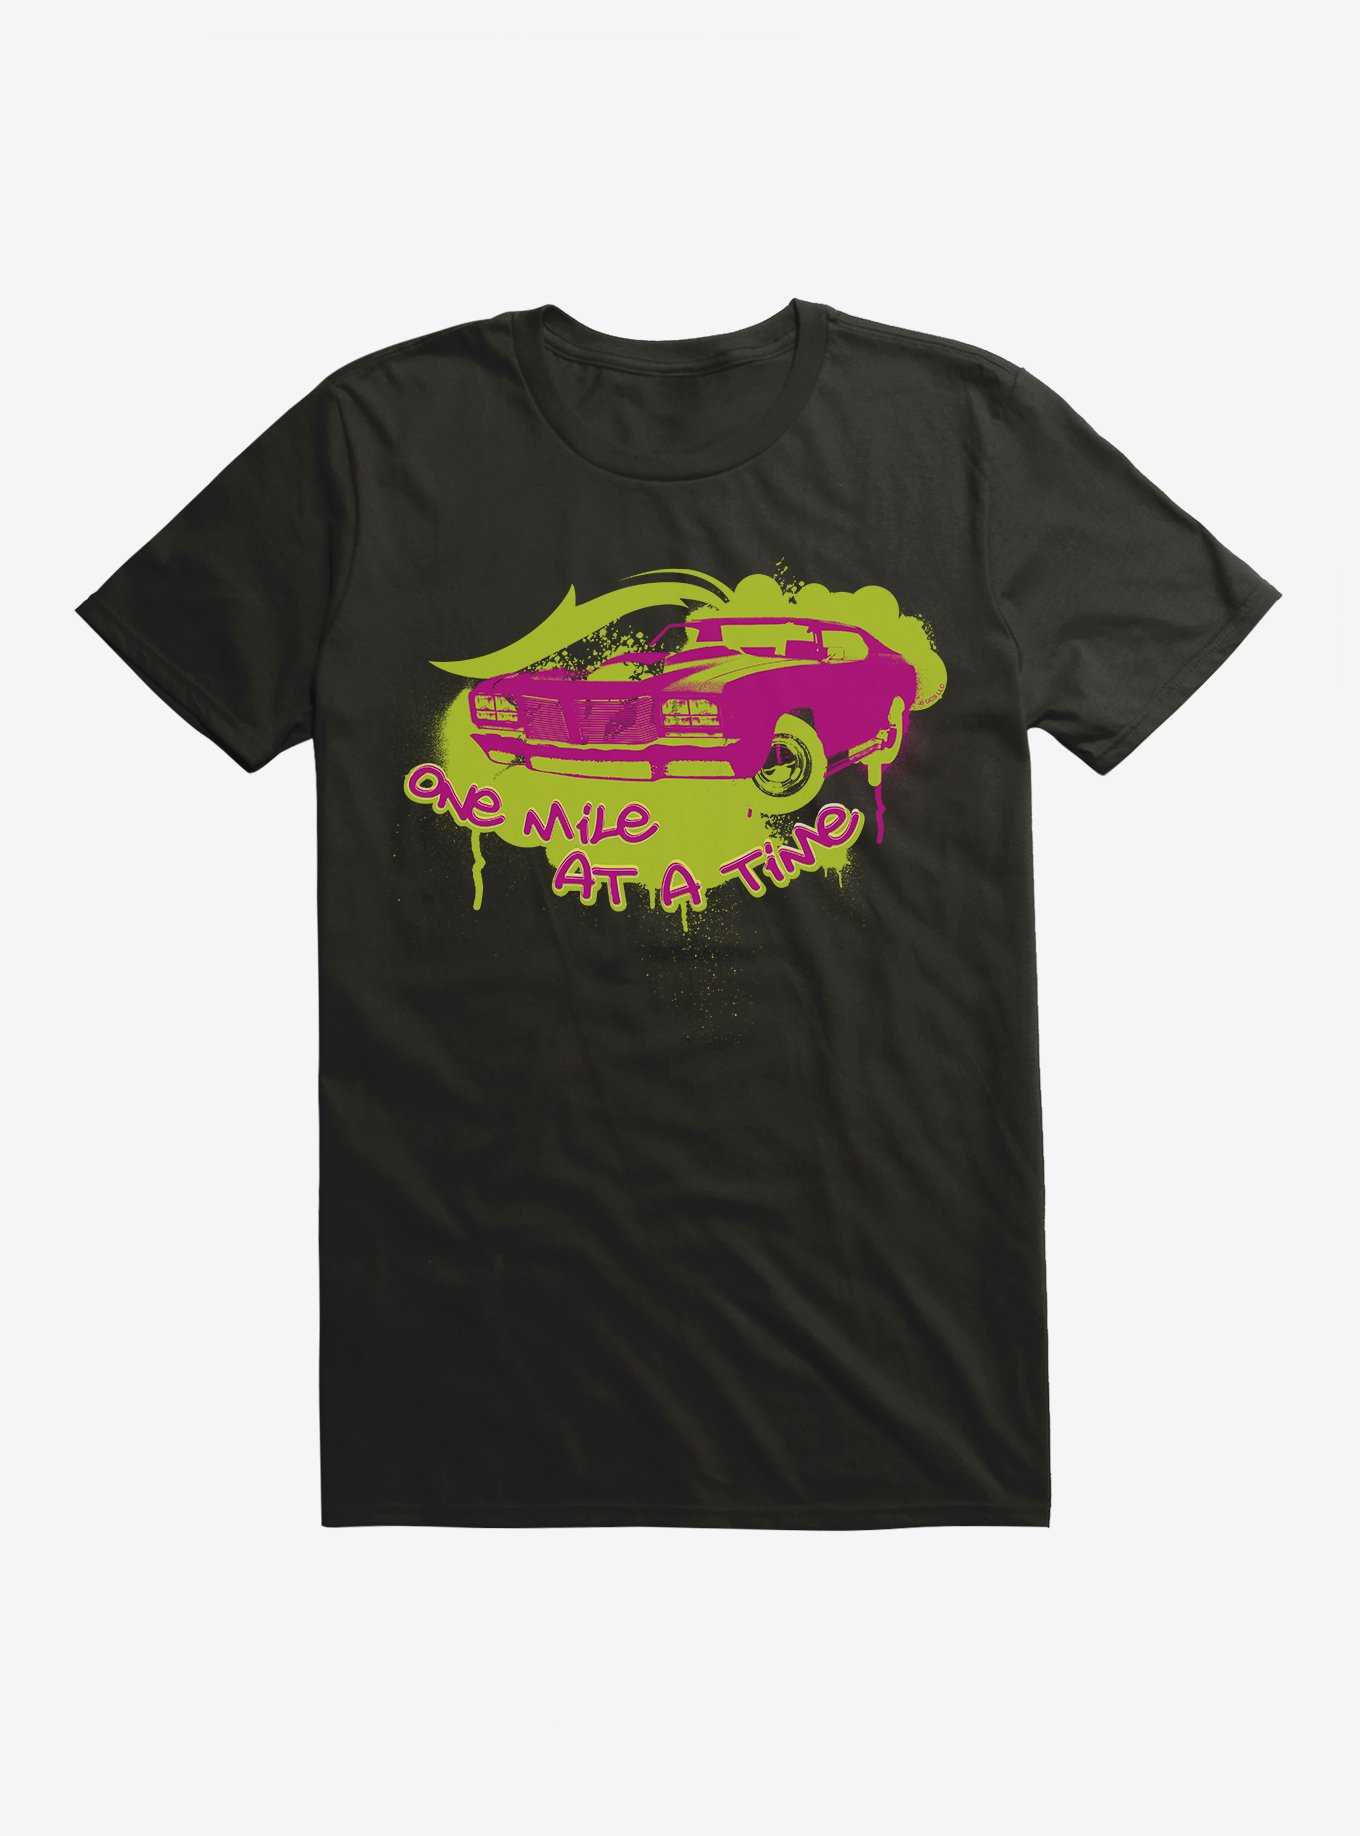 Fast & Furious One Mile At A Time T-Shirt, , hi-res